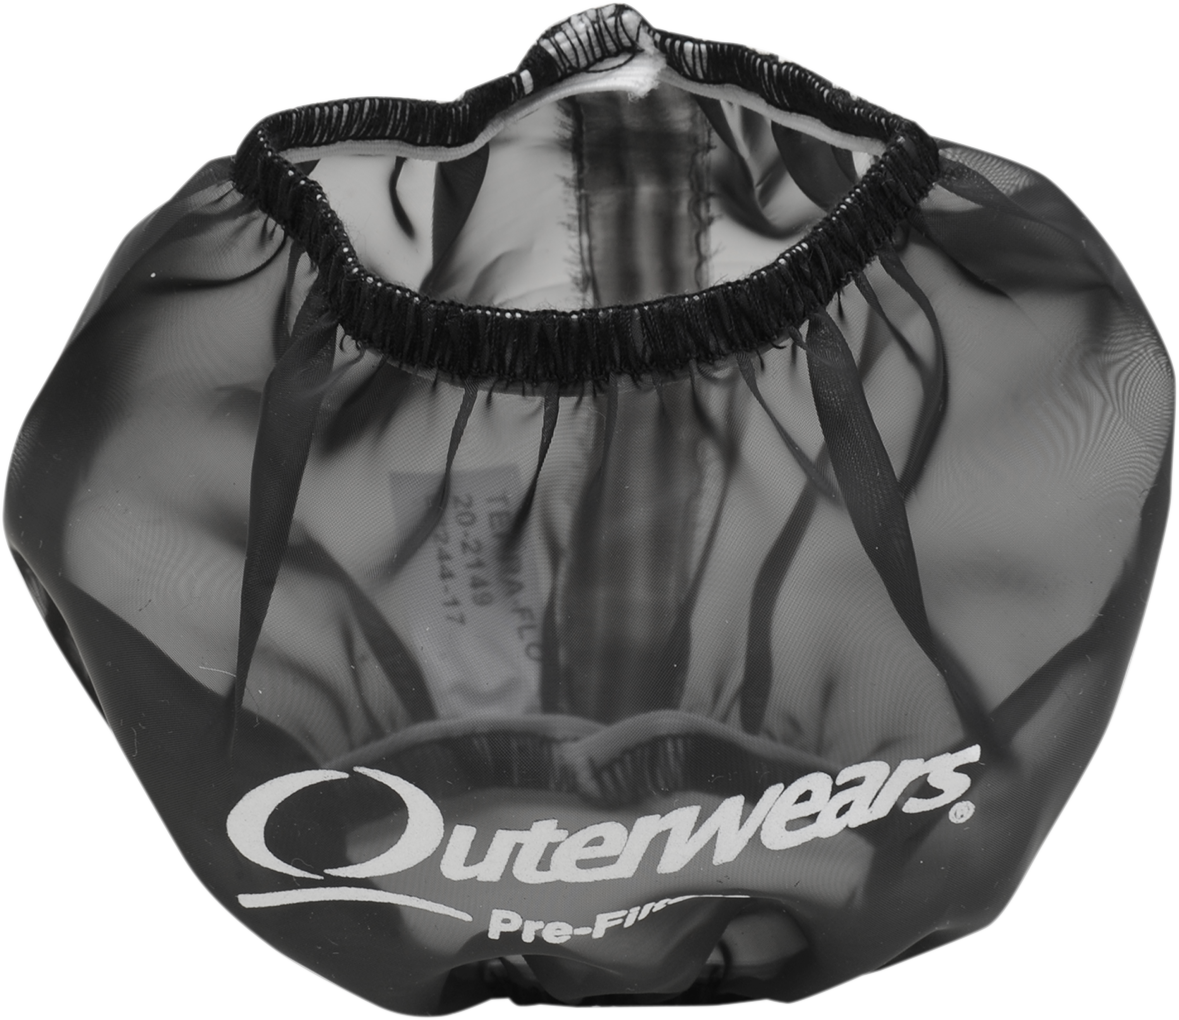 OUTERWEARS Water Repellent Pre-Filter - Black 20-1113-01